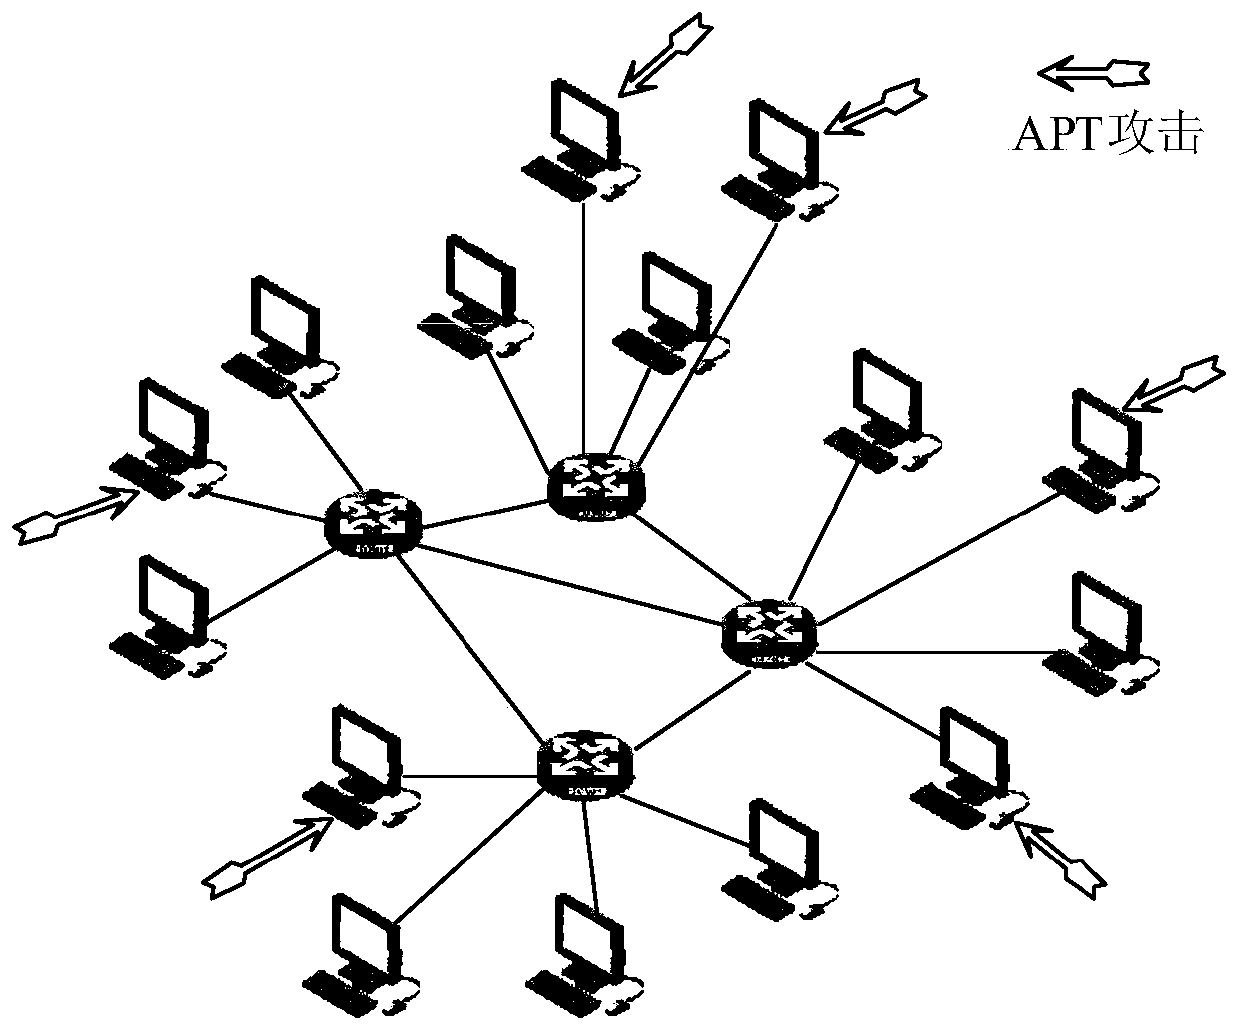 Network defense resource optimal allocation method for advanced persistent threats